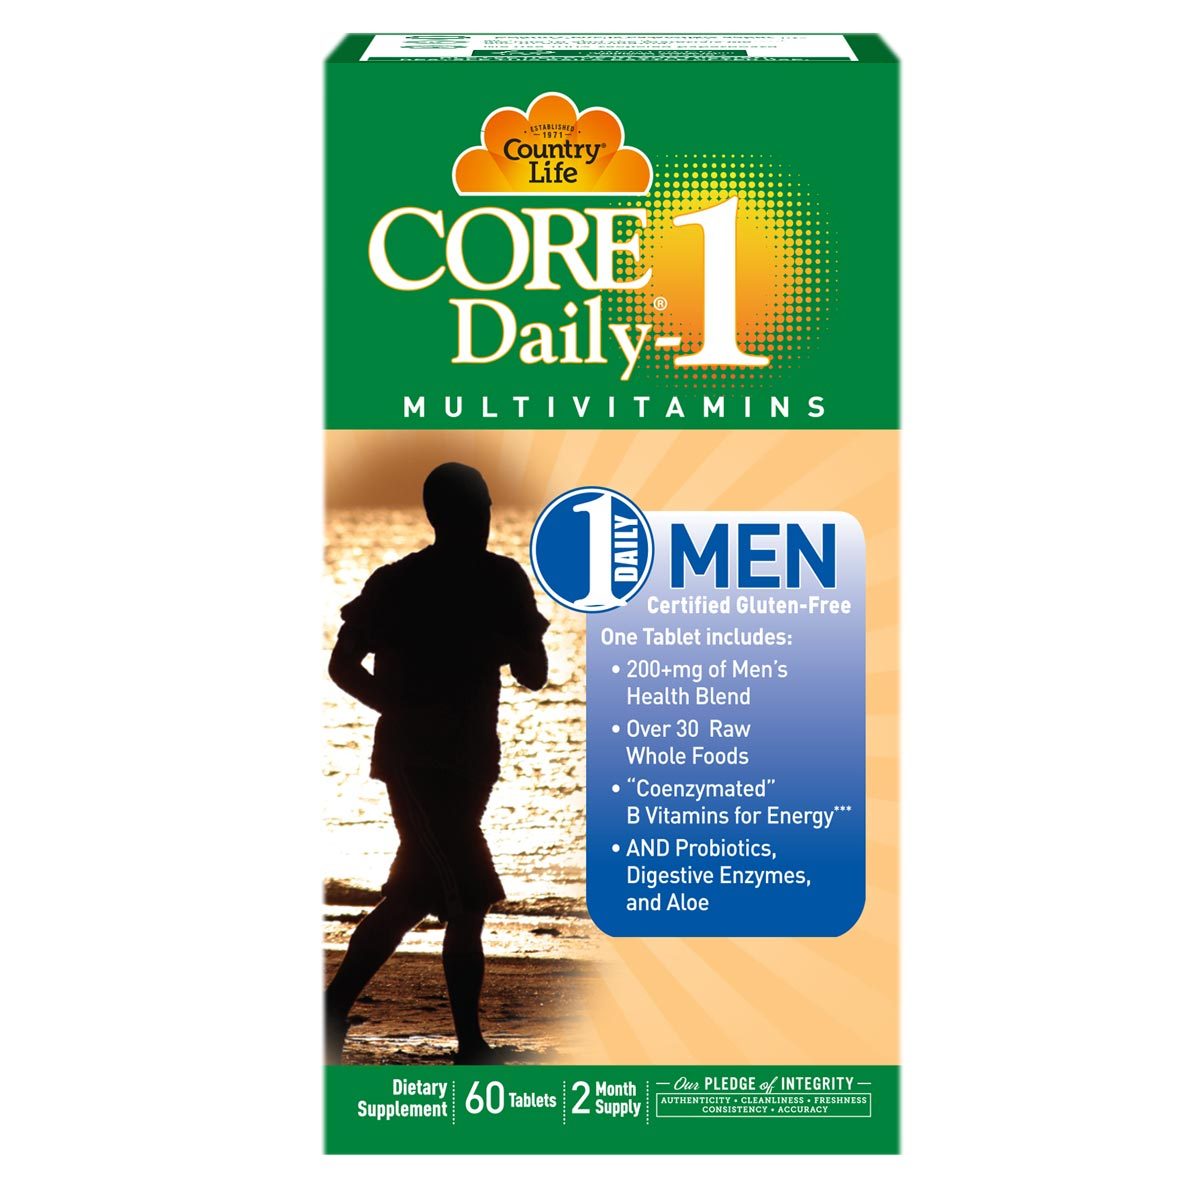 Country Life Core Daily-1 Men Multivitamin